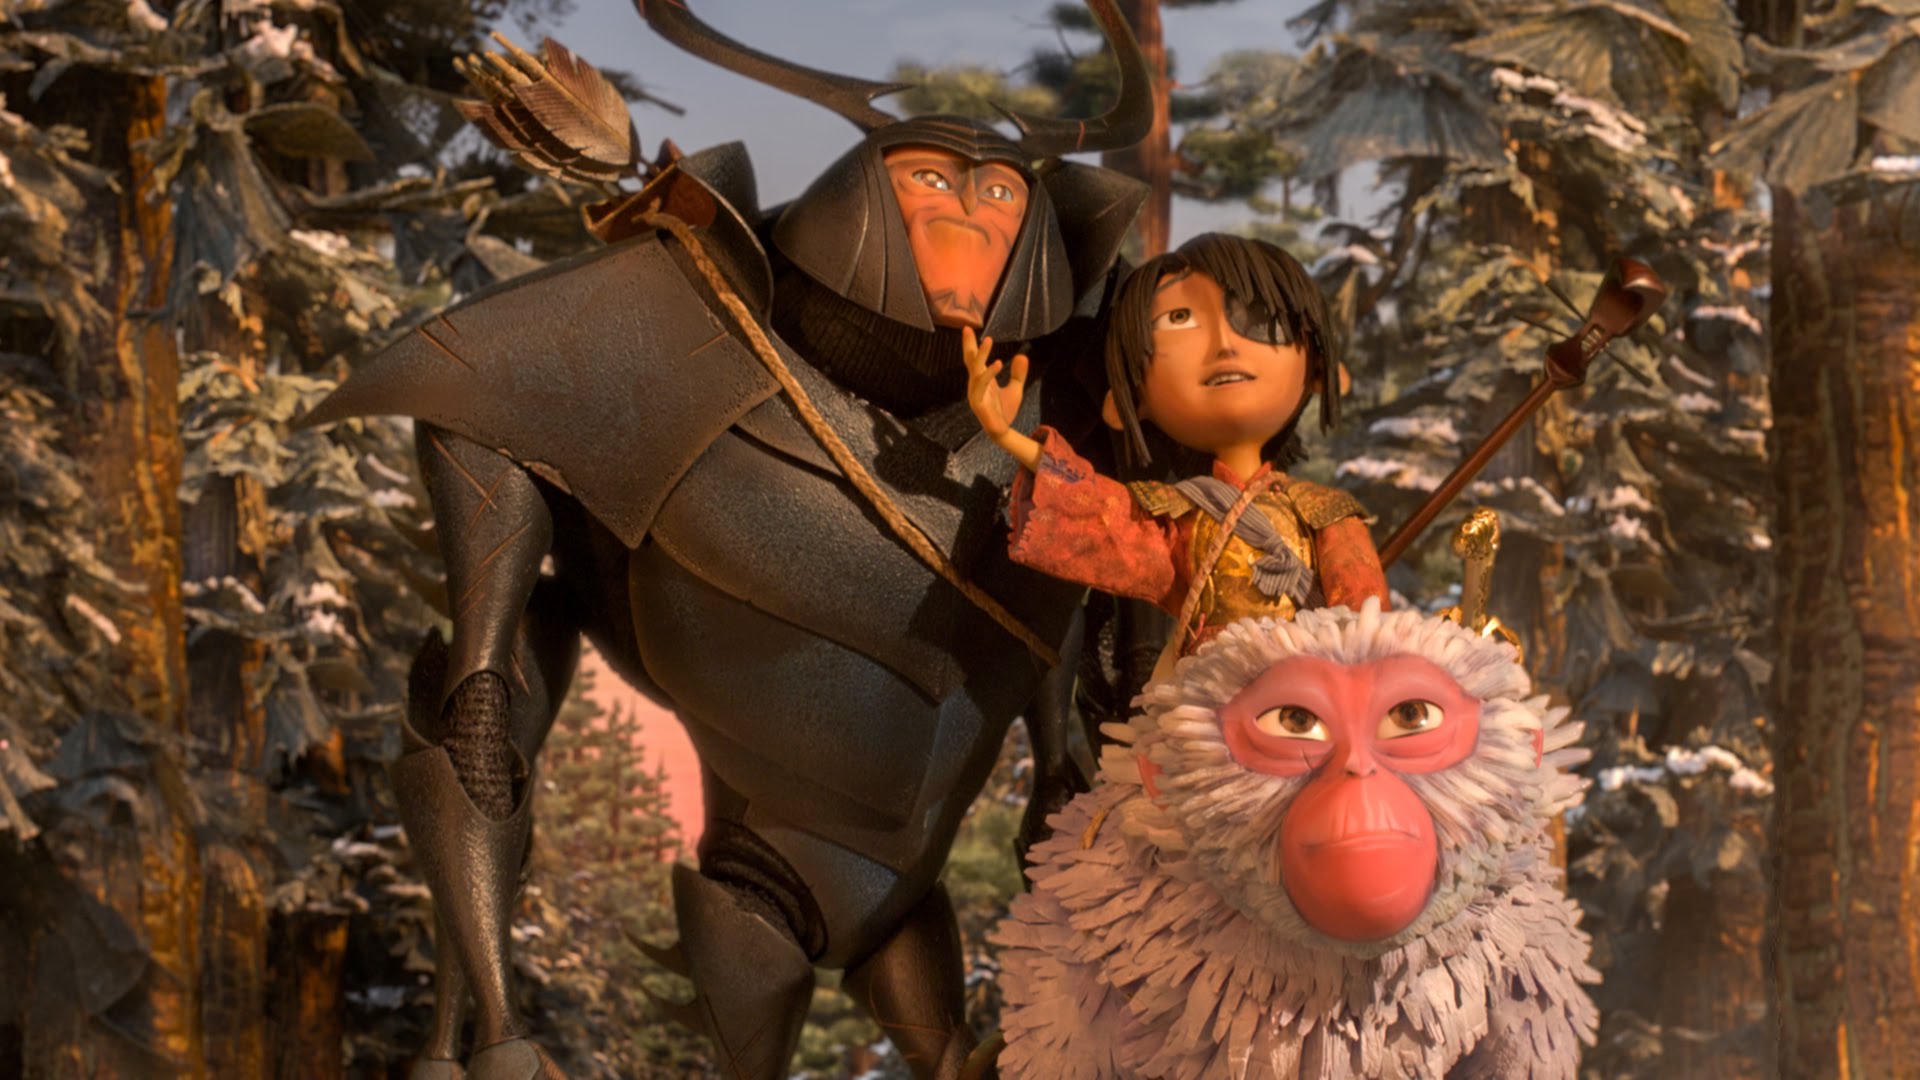 Animation Company LAIKA Says 'NOPE' to Sequels | The Mary Sue